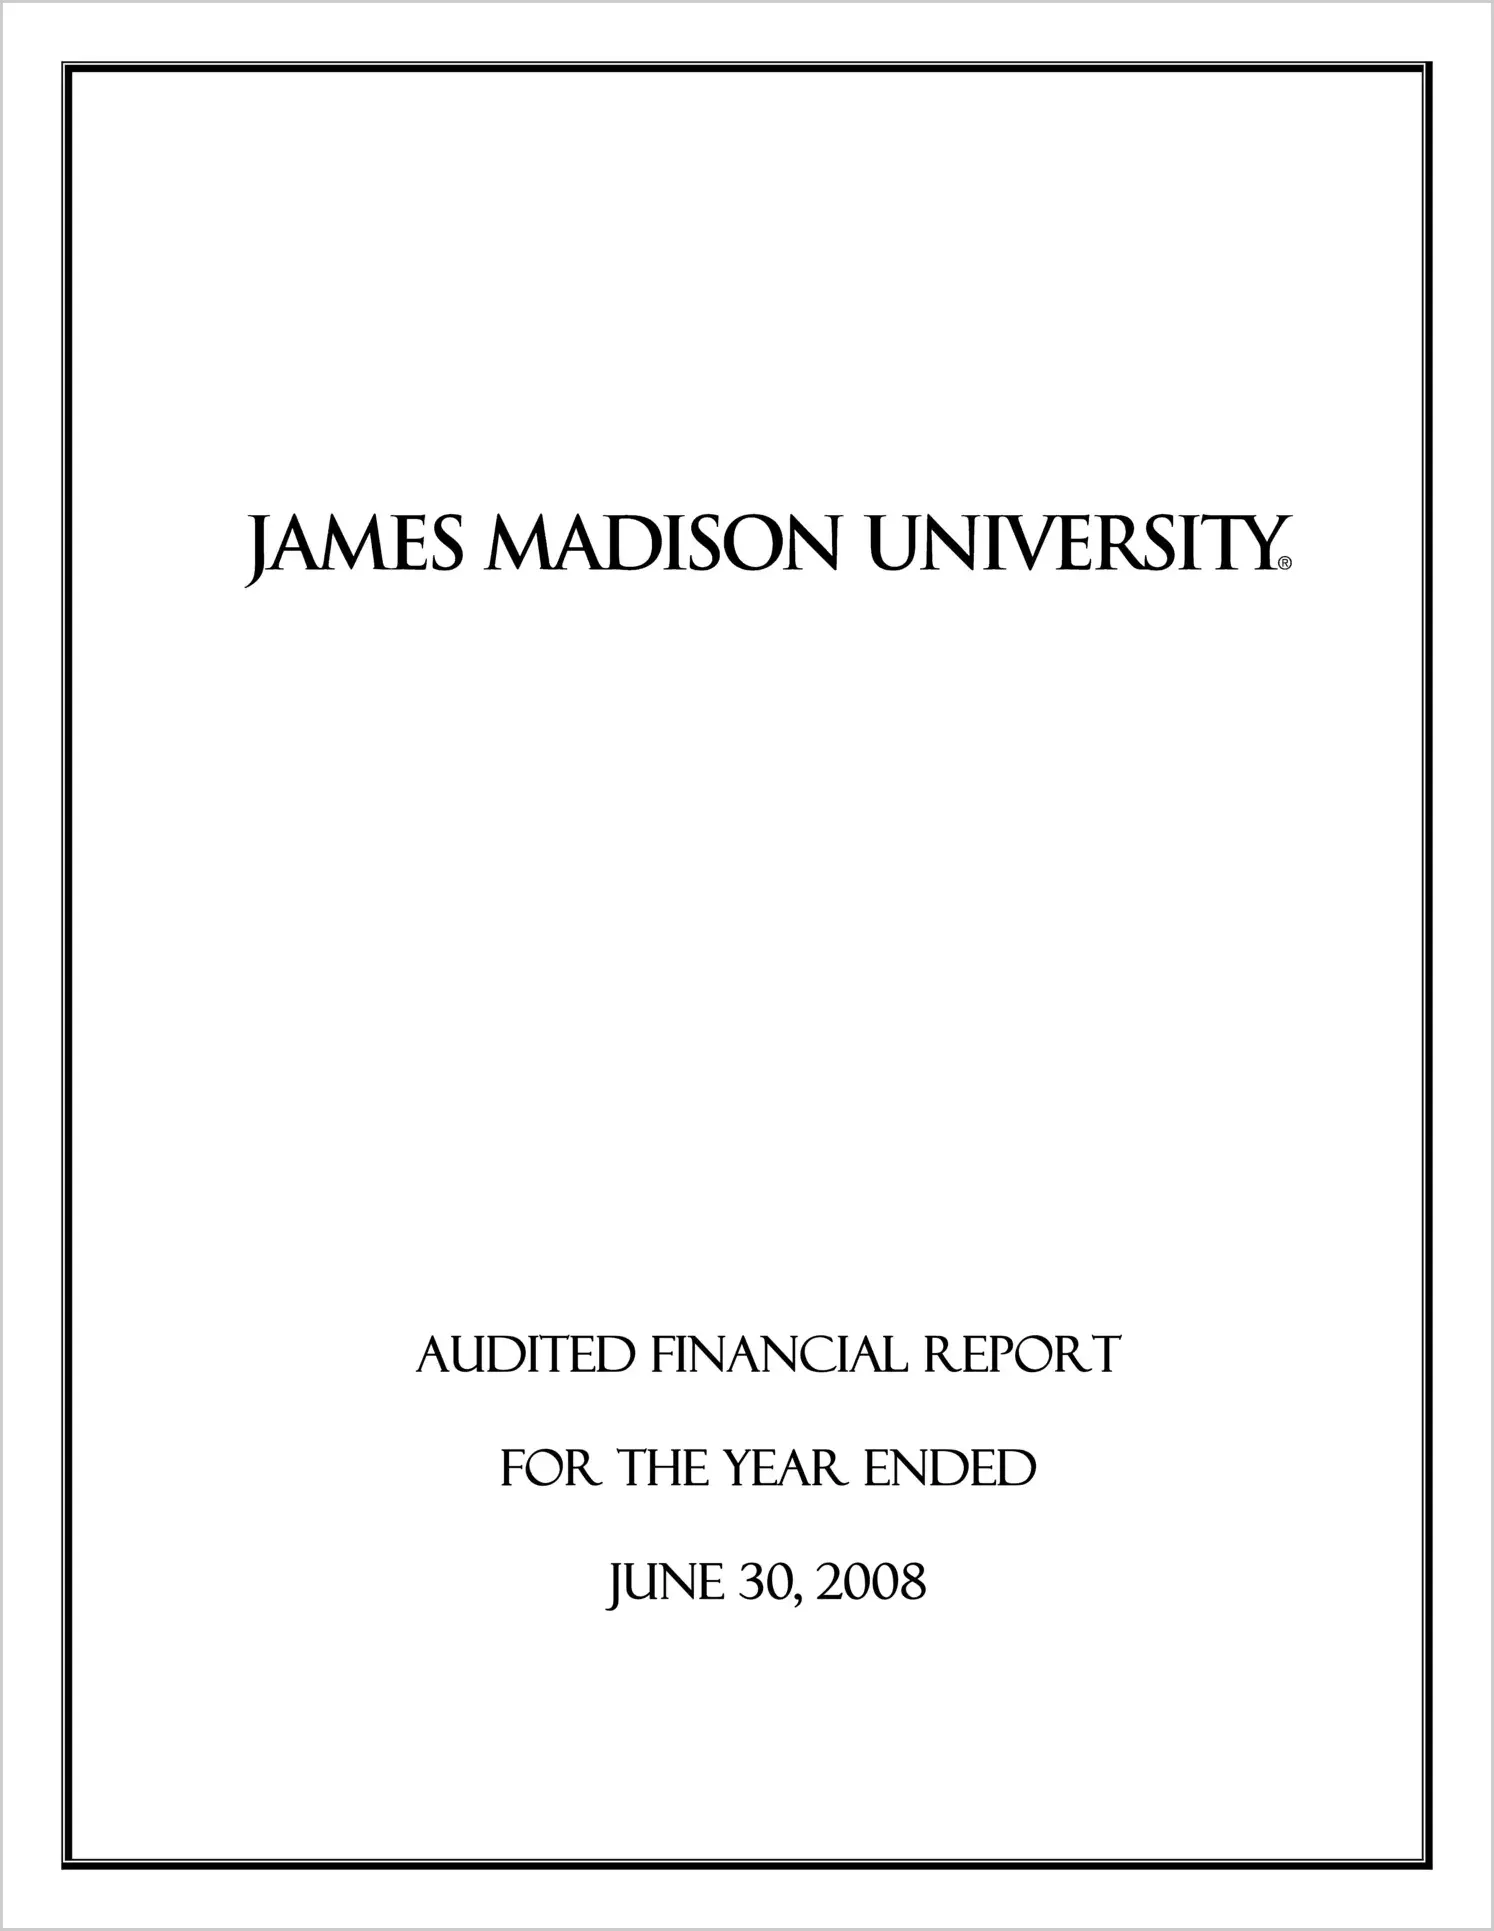 James Madison University Financial Statements for the year ended June 30, 2008